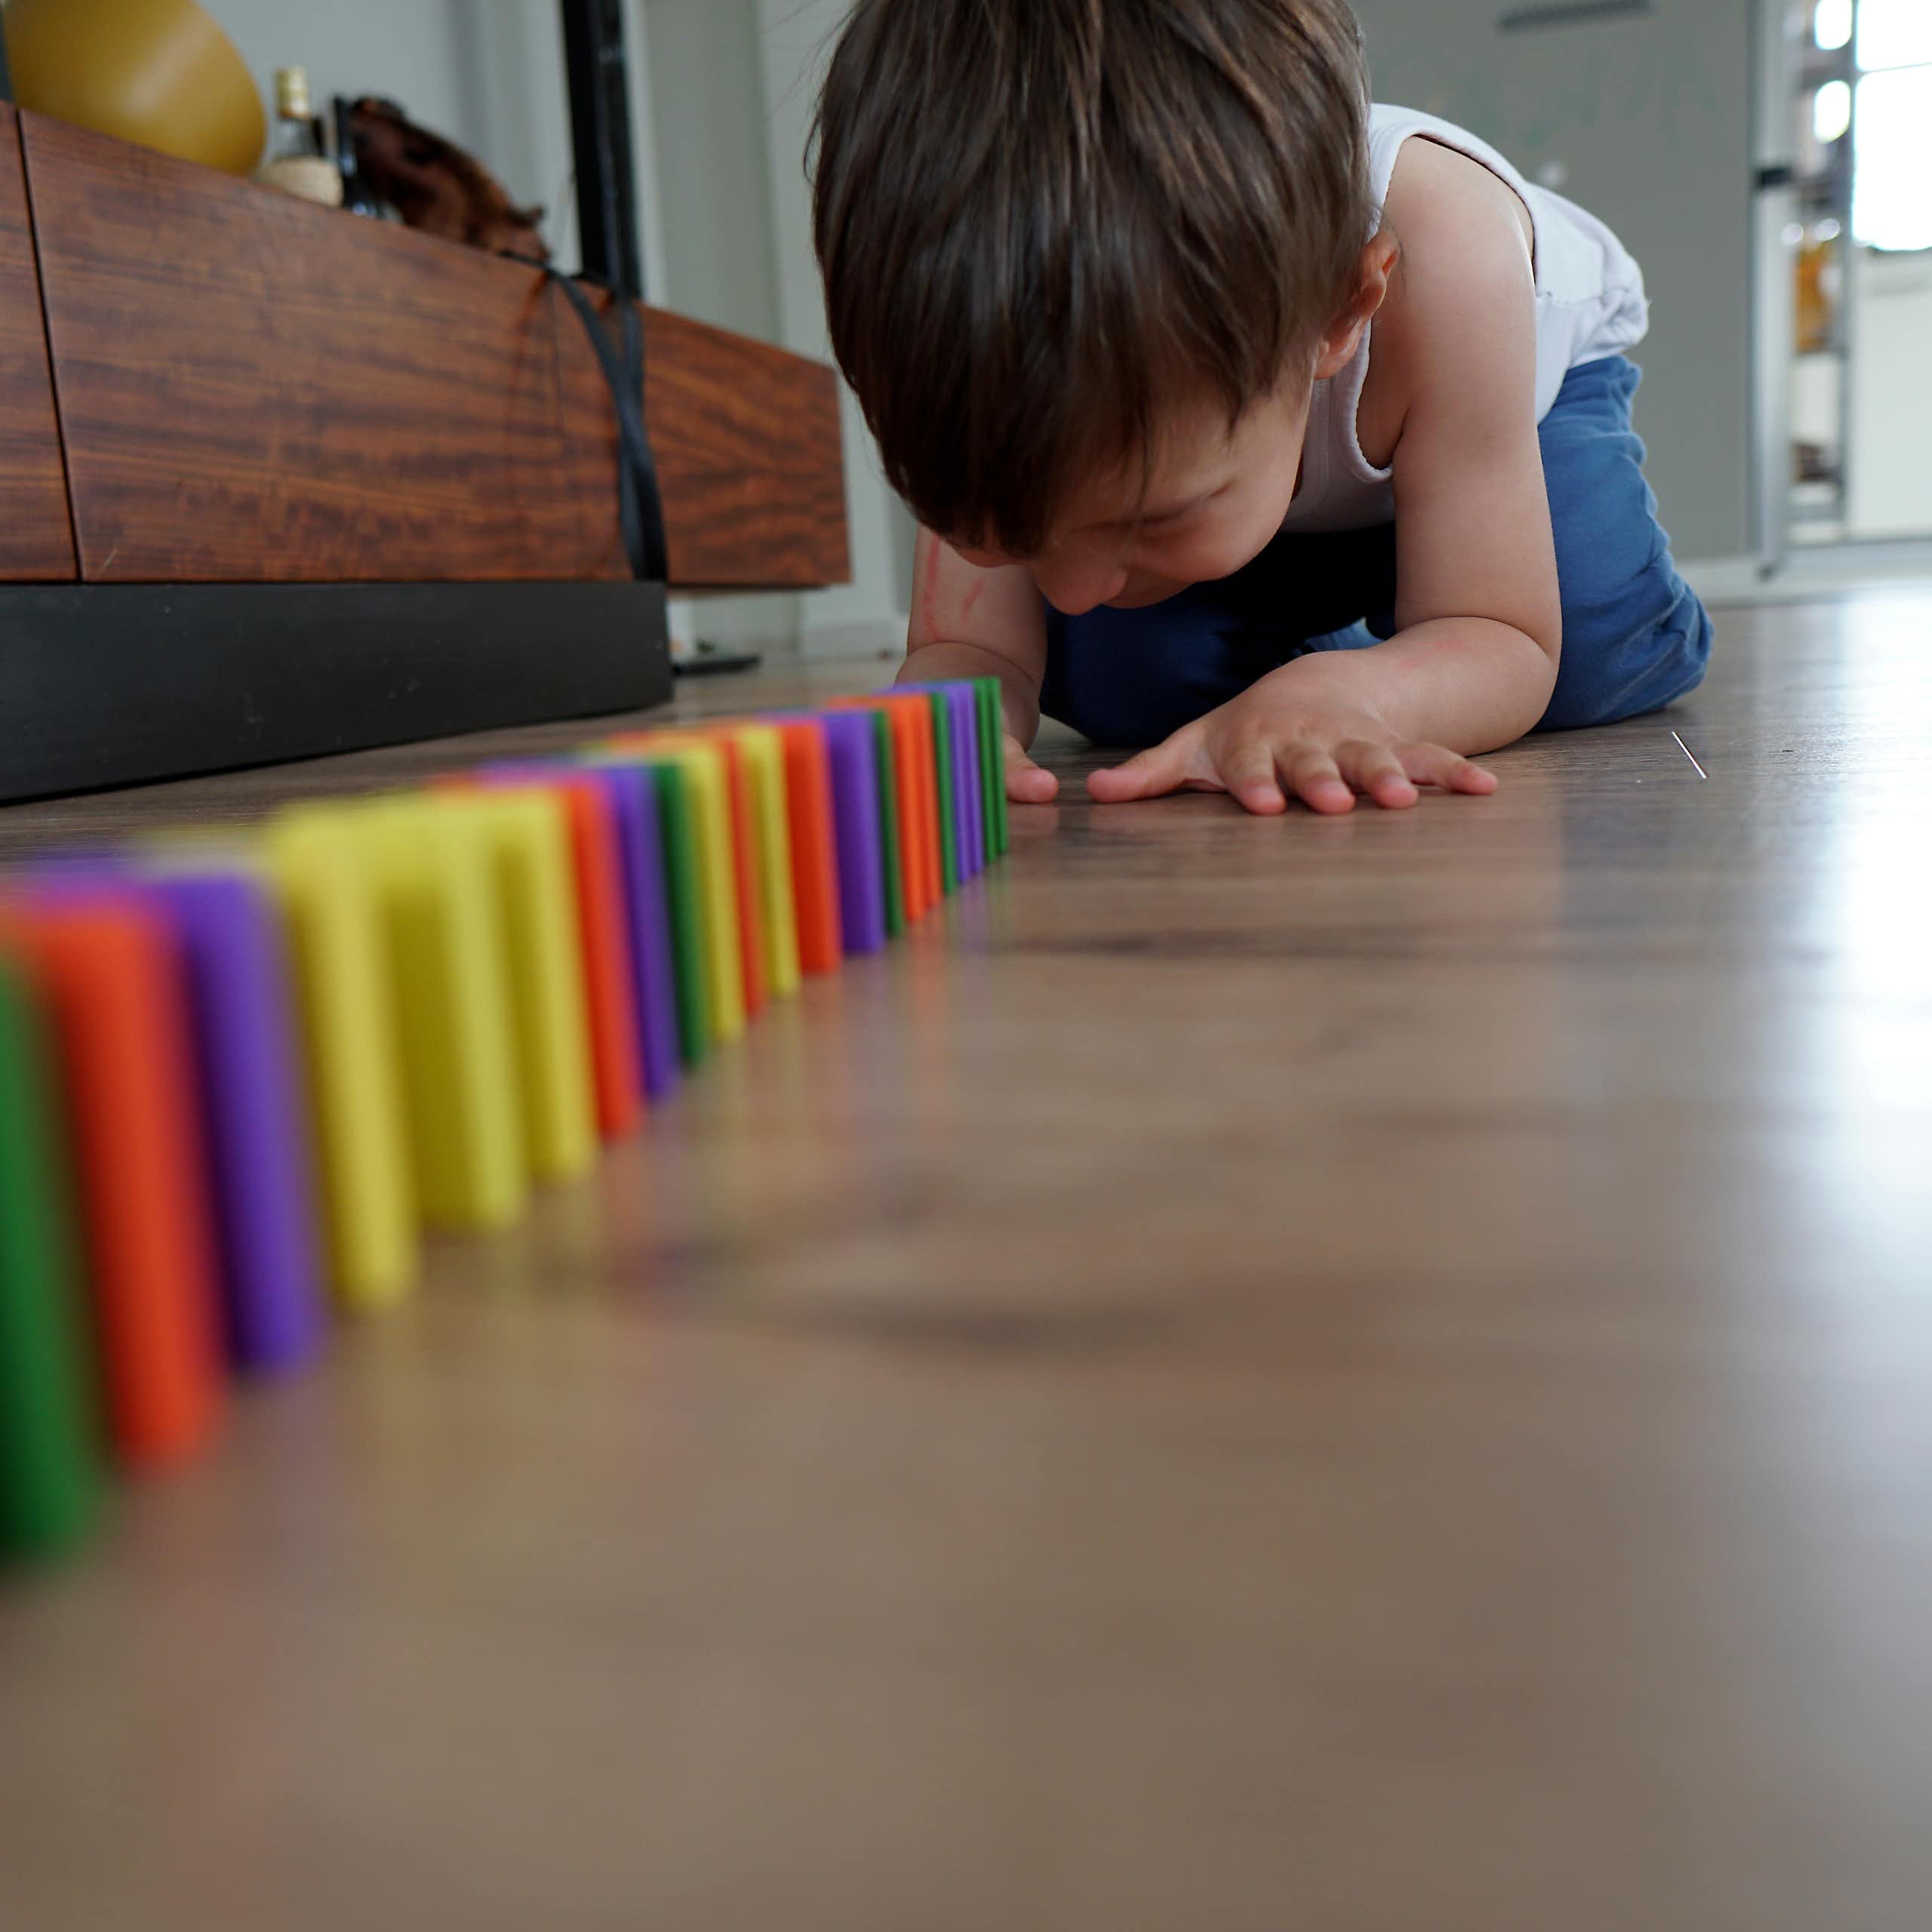 boy on living room floor sets up colourful dominoes in straight line